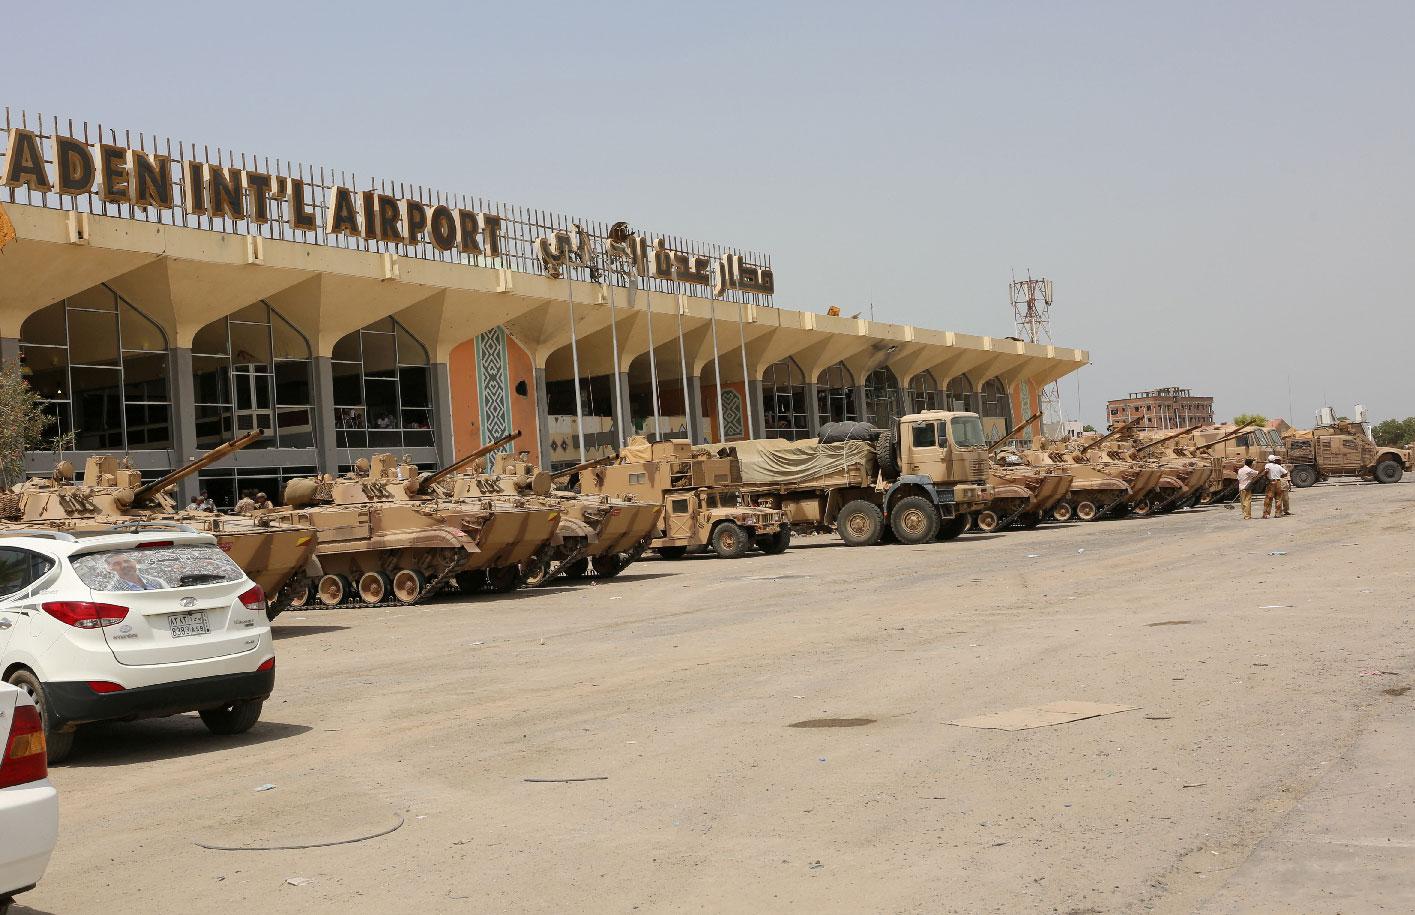 UAE military vehicles are seen at the international airport of Aden